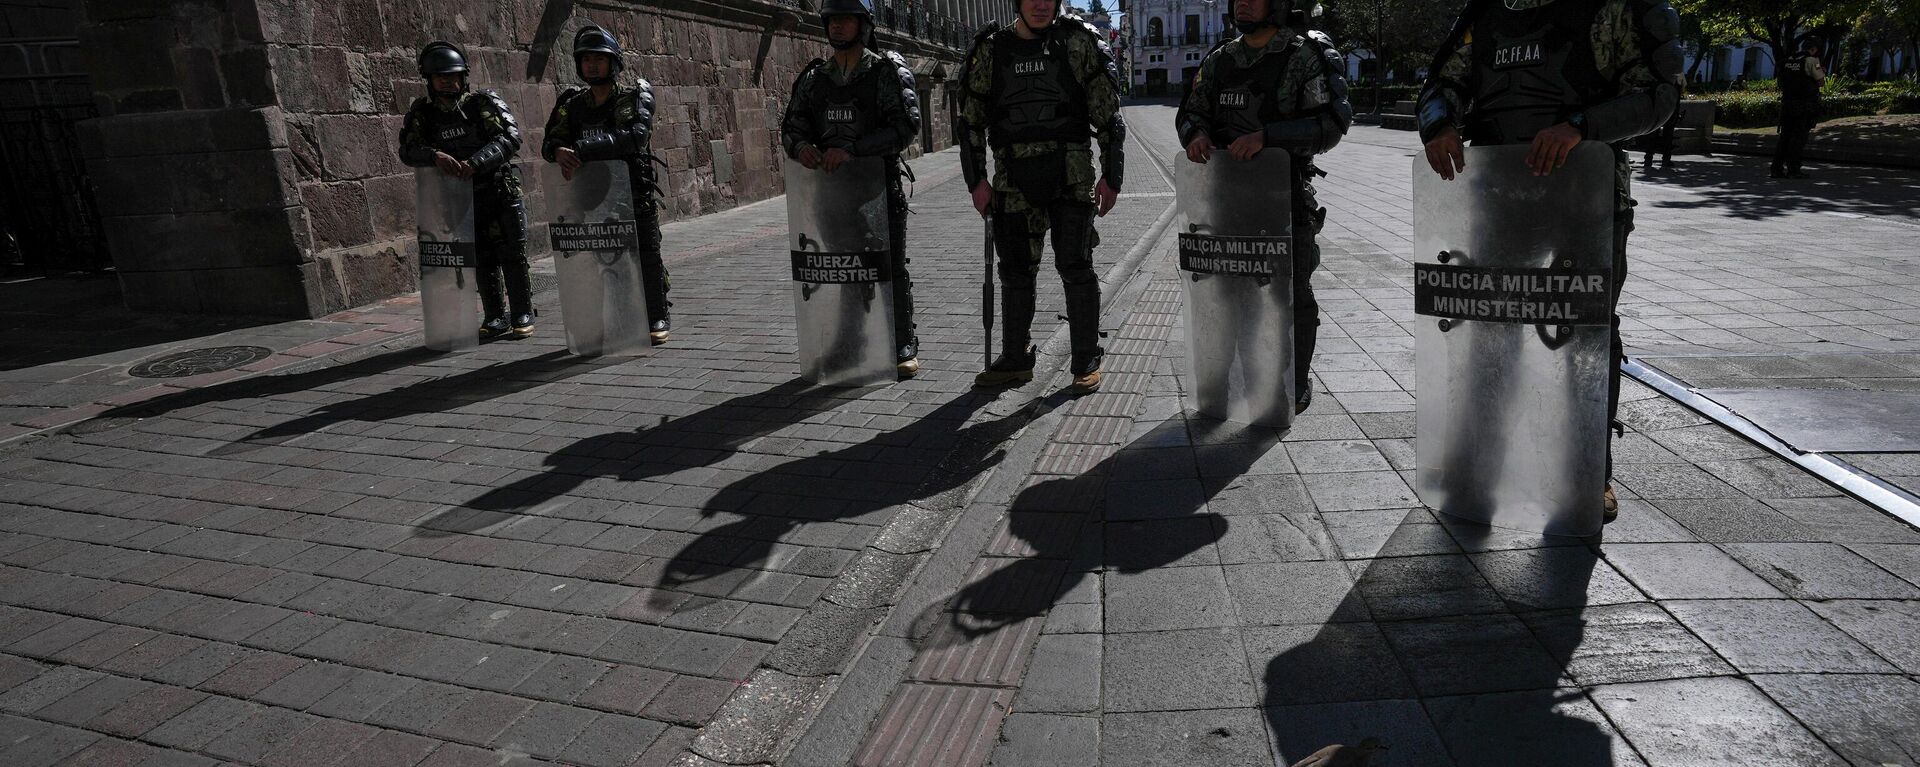 Military police guard the presidential palace in Quito, Ecuador, Thursday, Aug. 10, 2023. President Guillermo Lasso declared a state of emergency, that involves additional military personnel deployed throughout the country, after the assassination of presidential candidate Fernando Villavicencio at a campaign rally in Quito. - Sputnik International, 1920, 17.08.2023